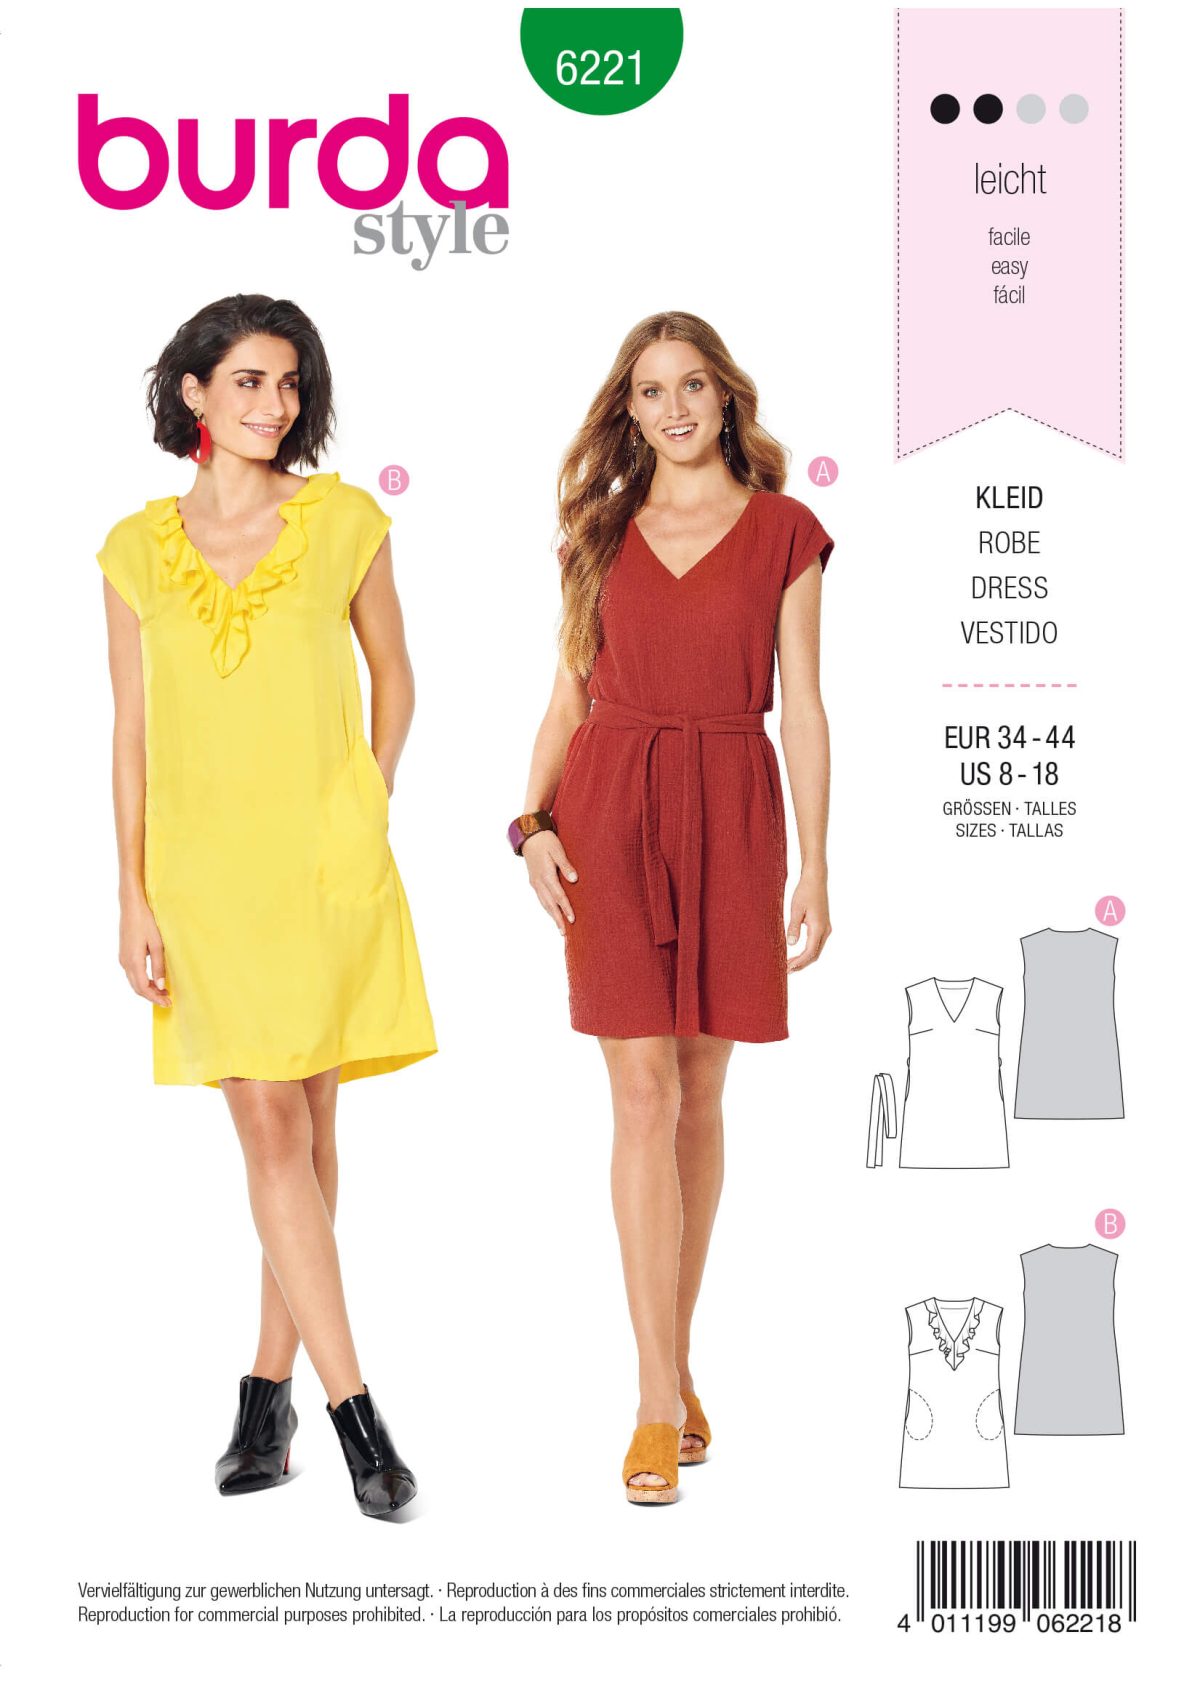 Burda Style Pattern 6221 Misses' Pull-On Dresses With Length Options